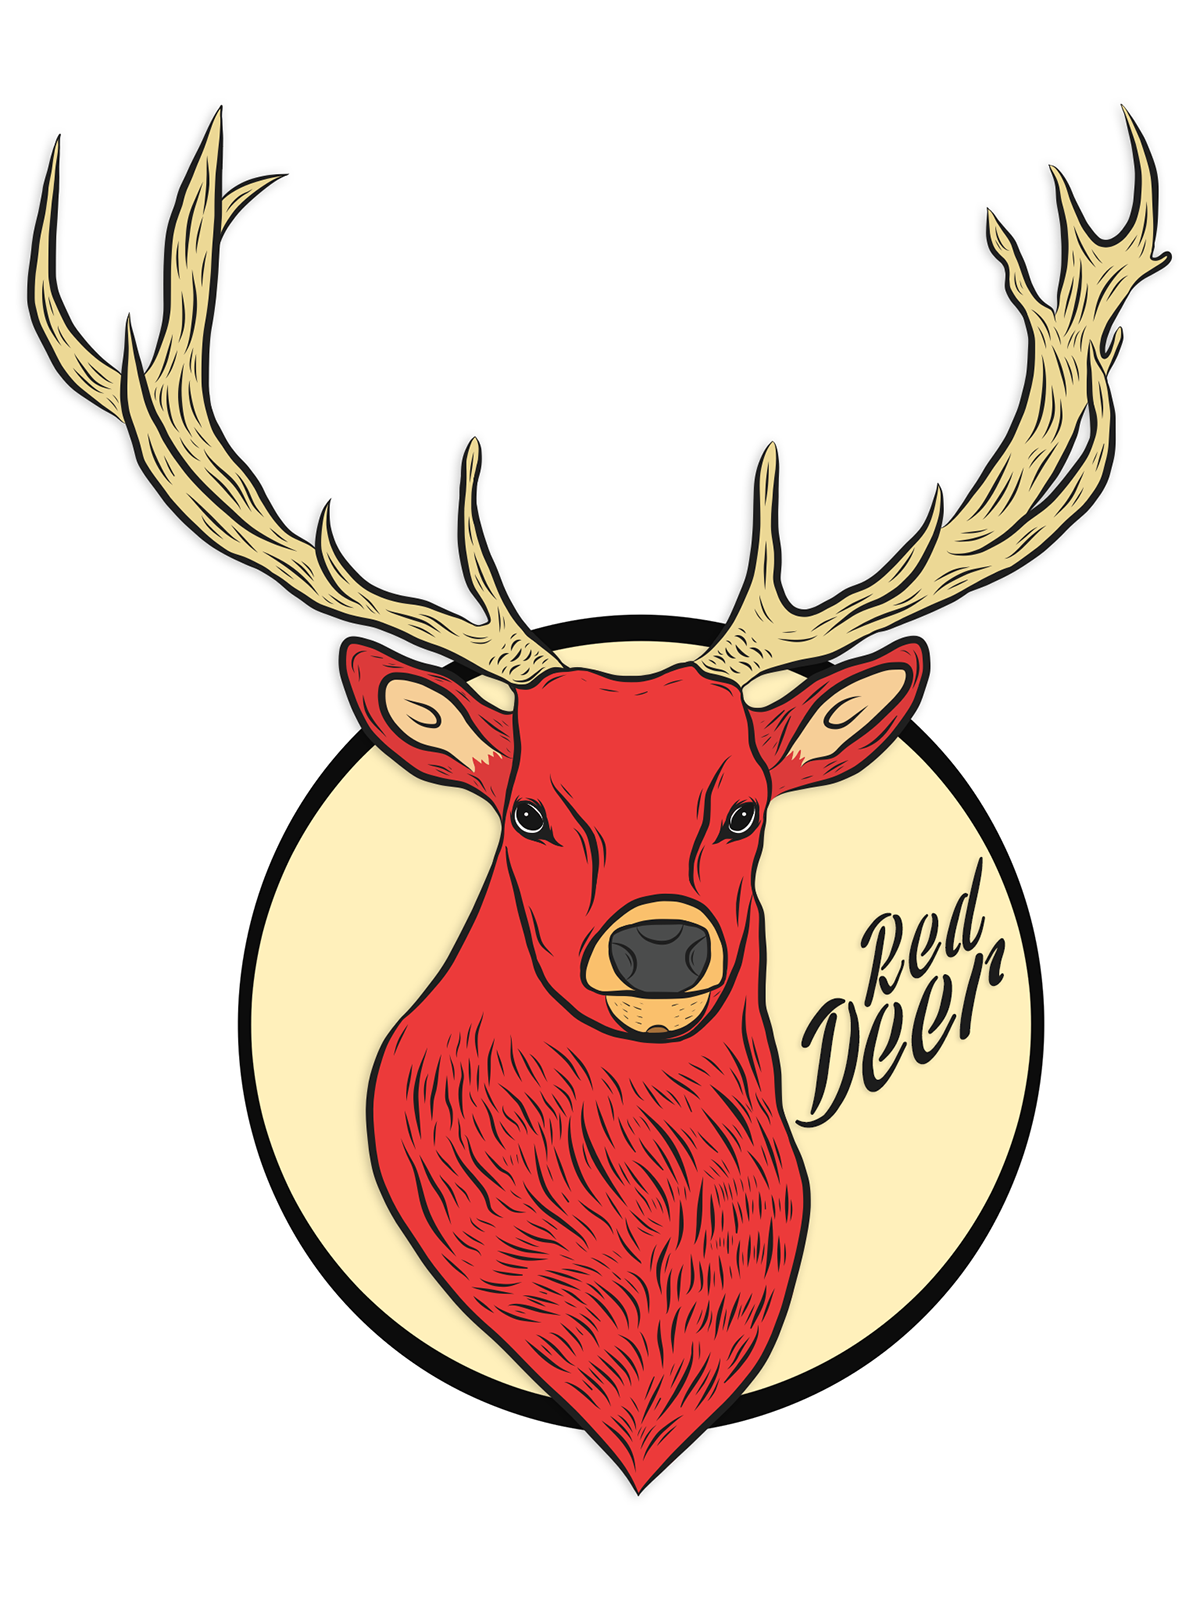 Snapchat geofilter for the. Deer clipart profile